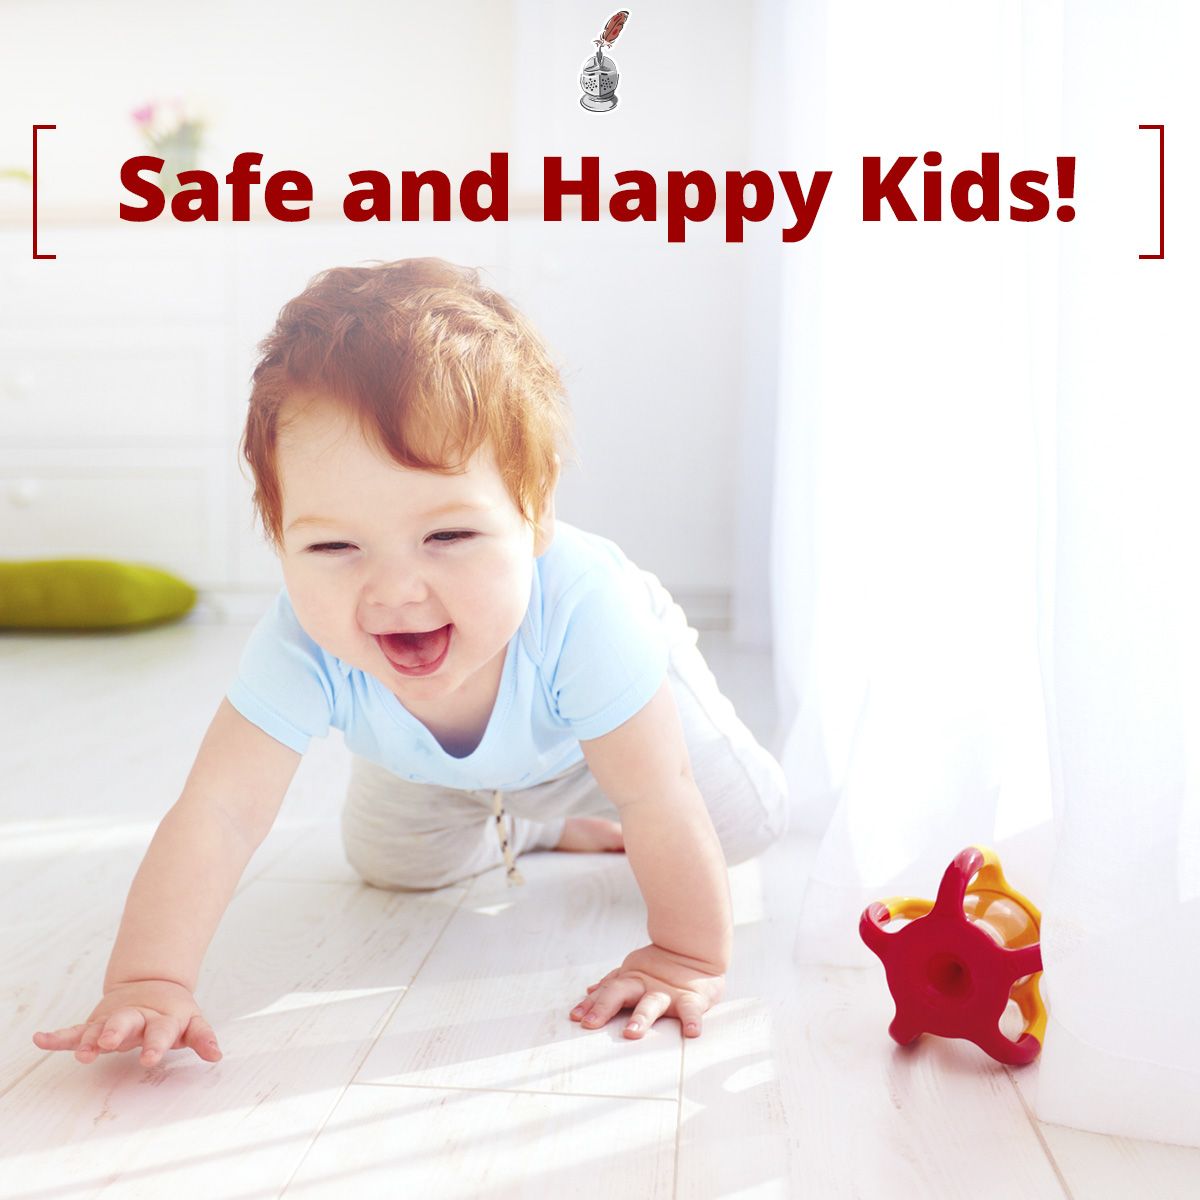 Safe and Happy Kids!